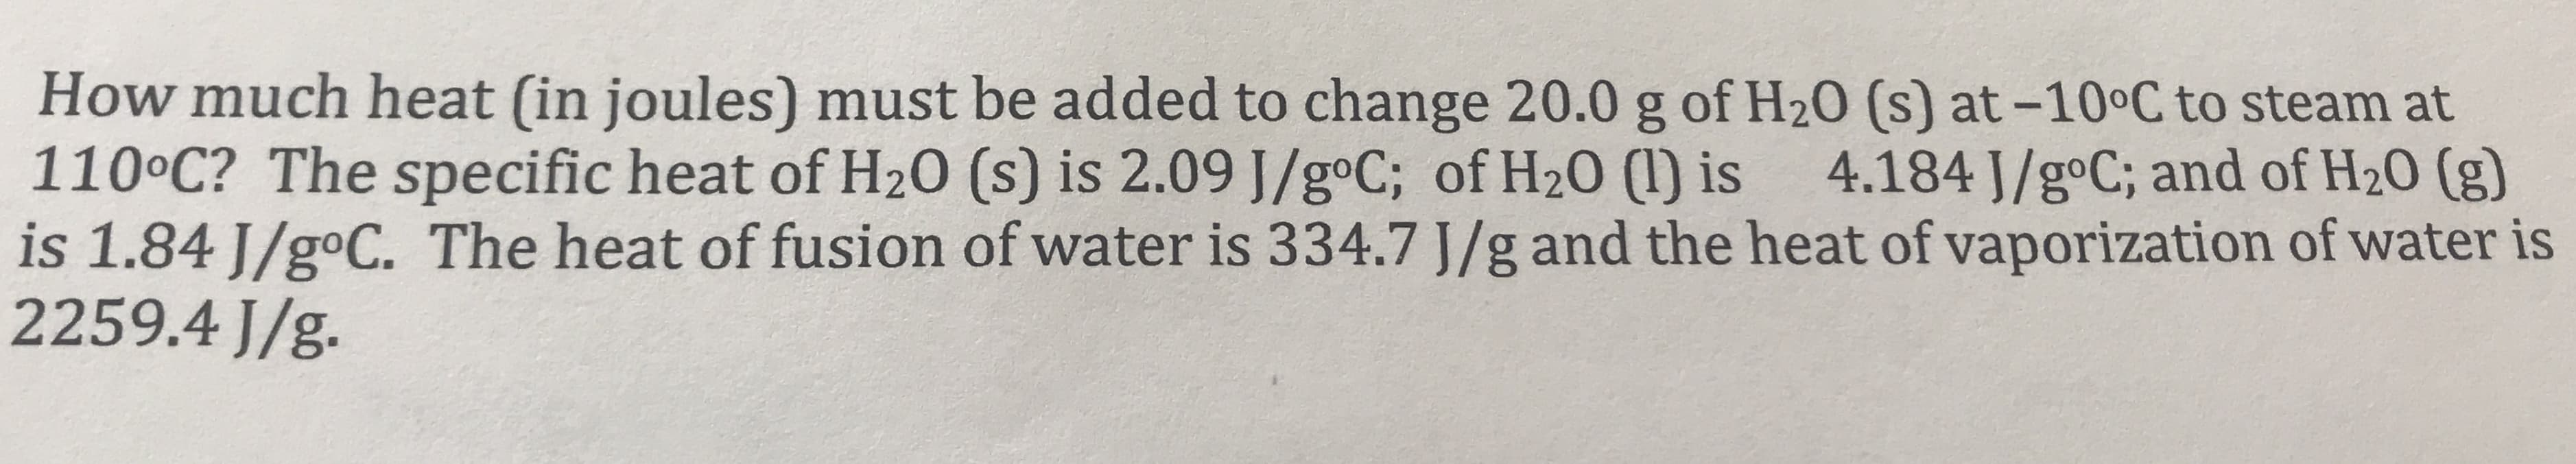 How much heat (in joules) must be added to change 20.0 g of H20 (s) at -10°C to steam at
110°C? The specific heat of H20 (s) is 2.09 J/goC; of H20 (1) is
is 1.84 J/goC. The heat of fusion of water is 334.7 J/g and the heat of vaporization of water is
2259.4 J/g.
4.184 J/goC; and of H20 (g)
